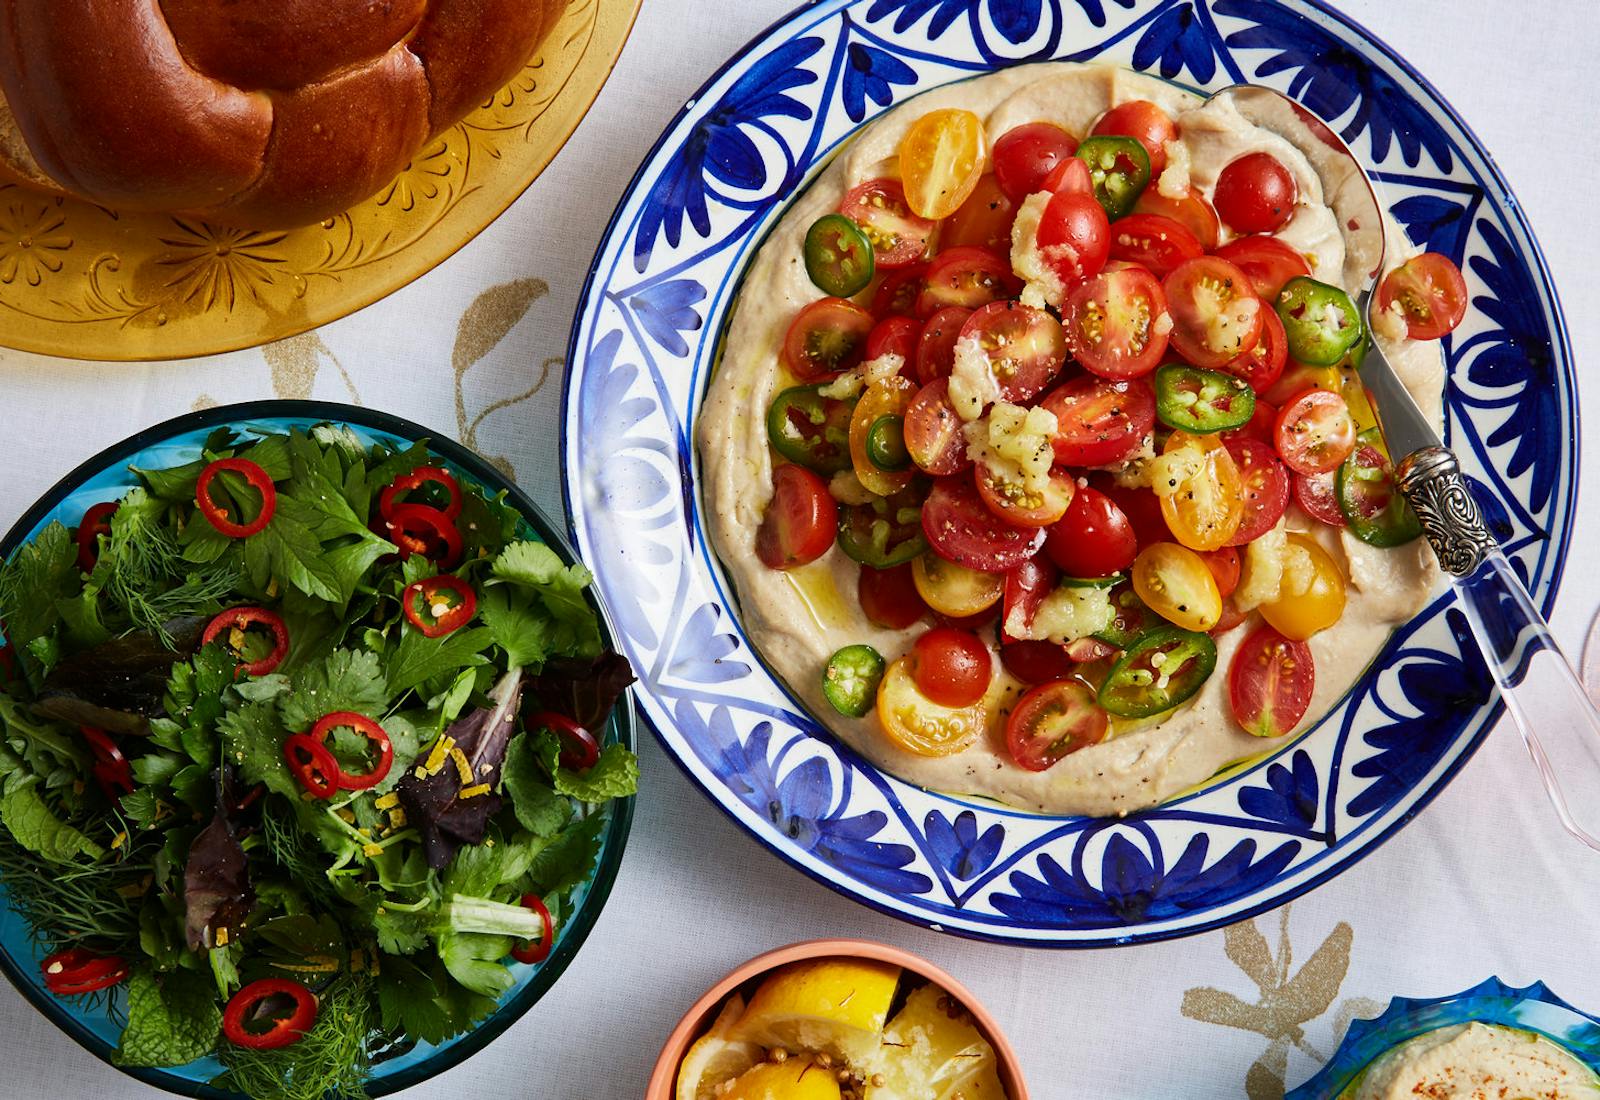 Tomato and garlic salad with tahini dressing in blue bowl alongside herb salad, challah and spiced lemon wedges.